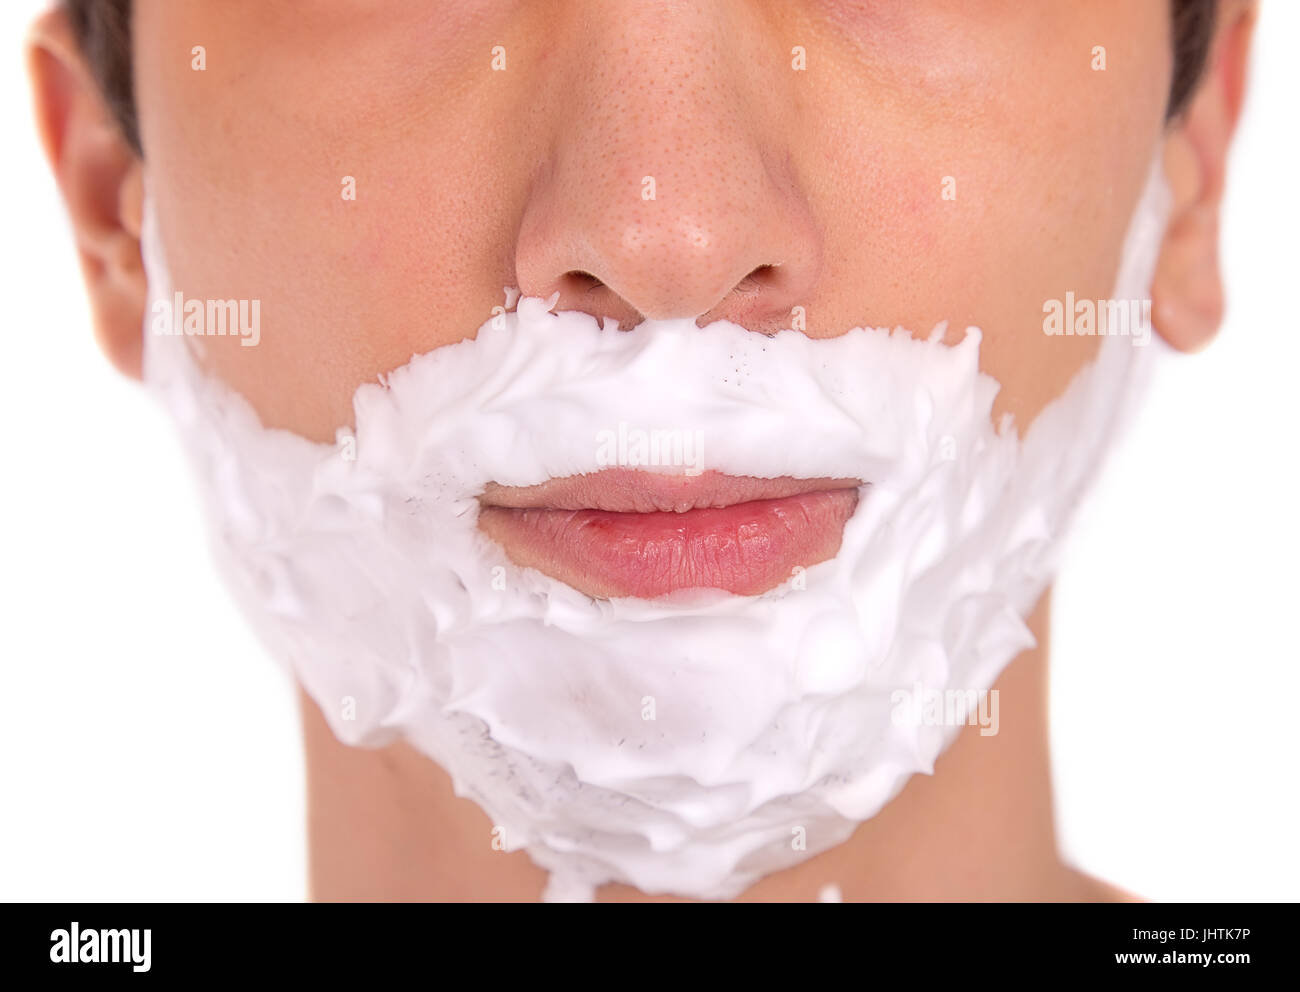 man's face with shaving foam close up isolated on white background Stock Photo